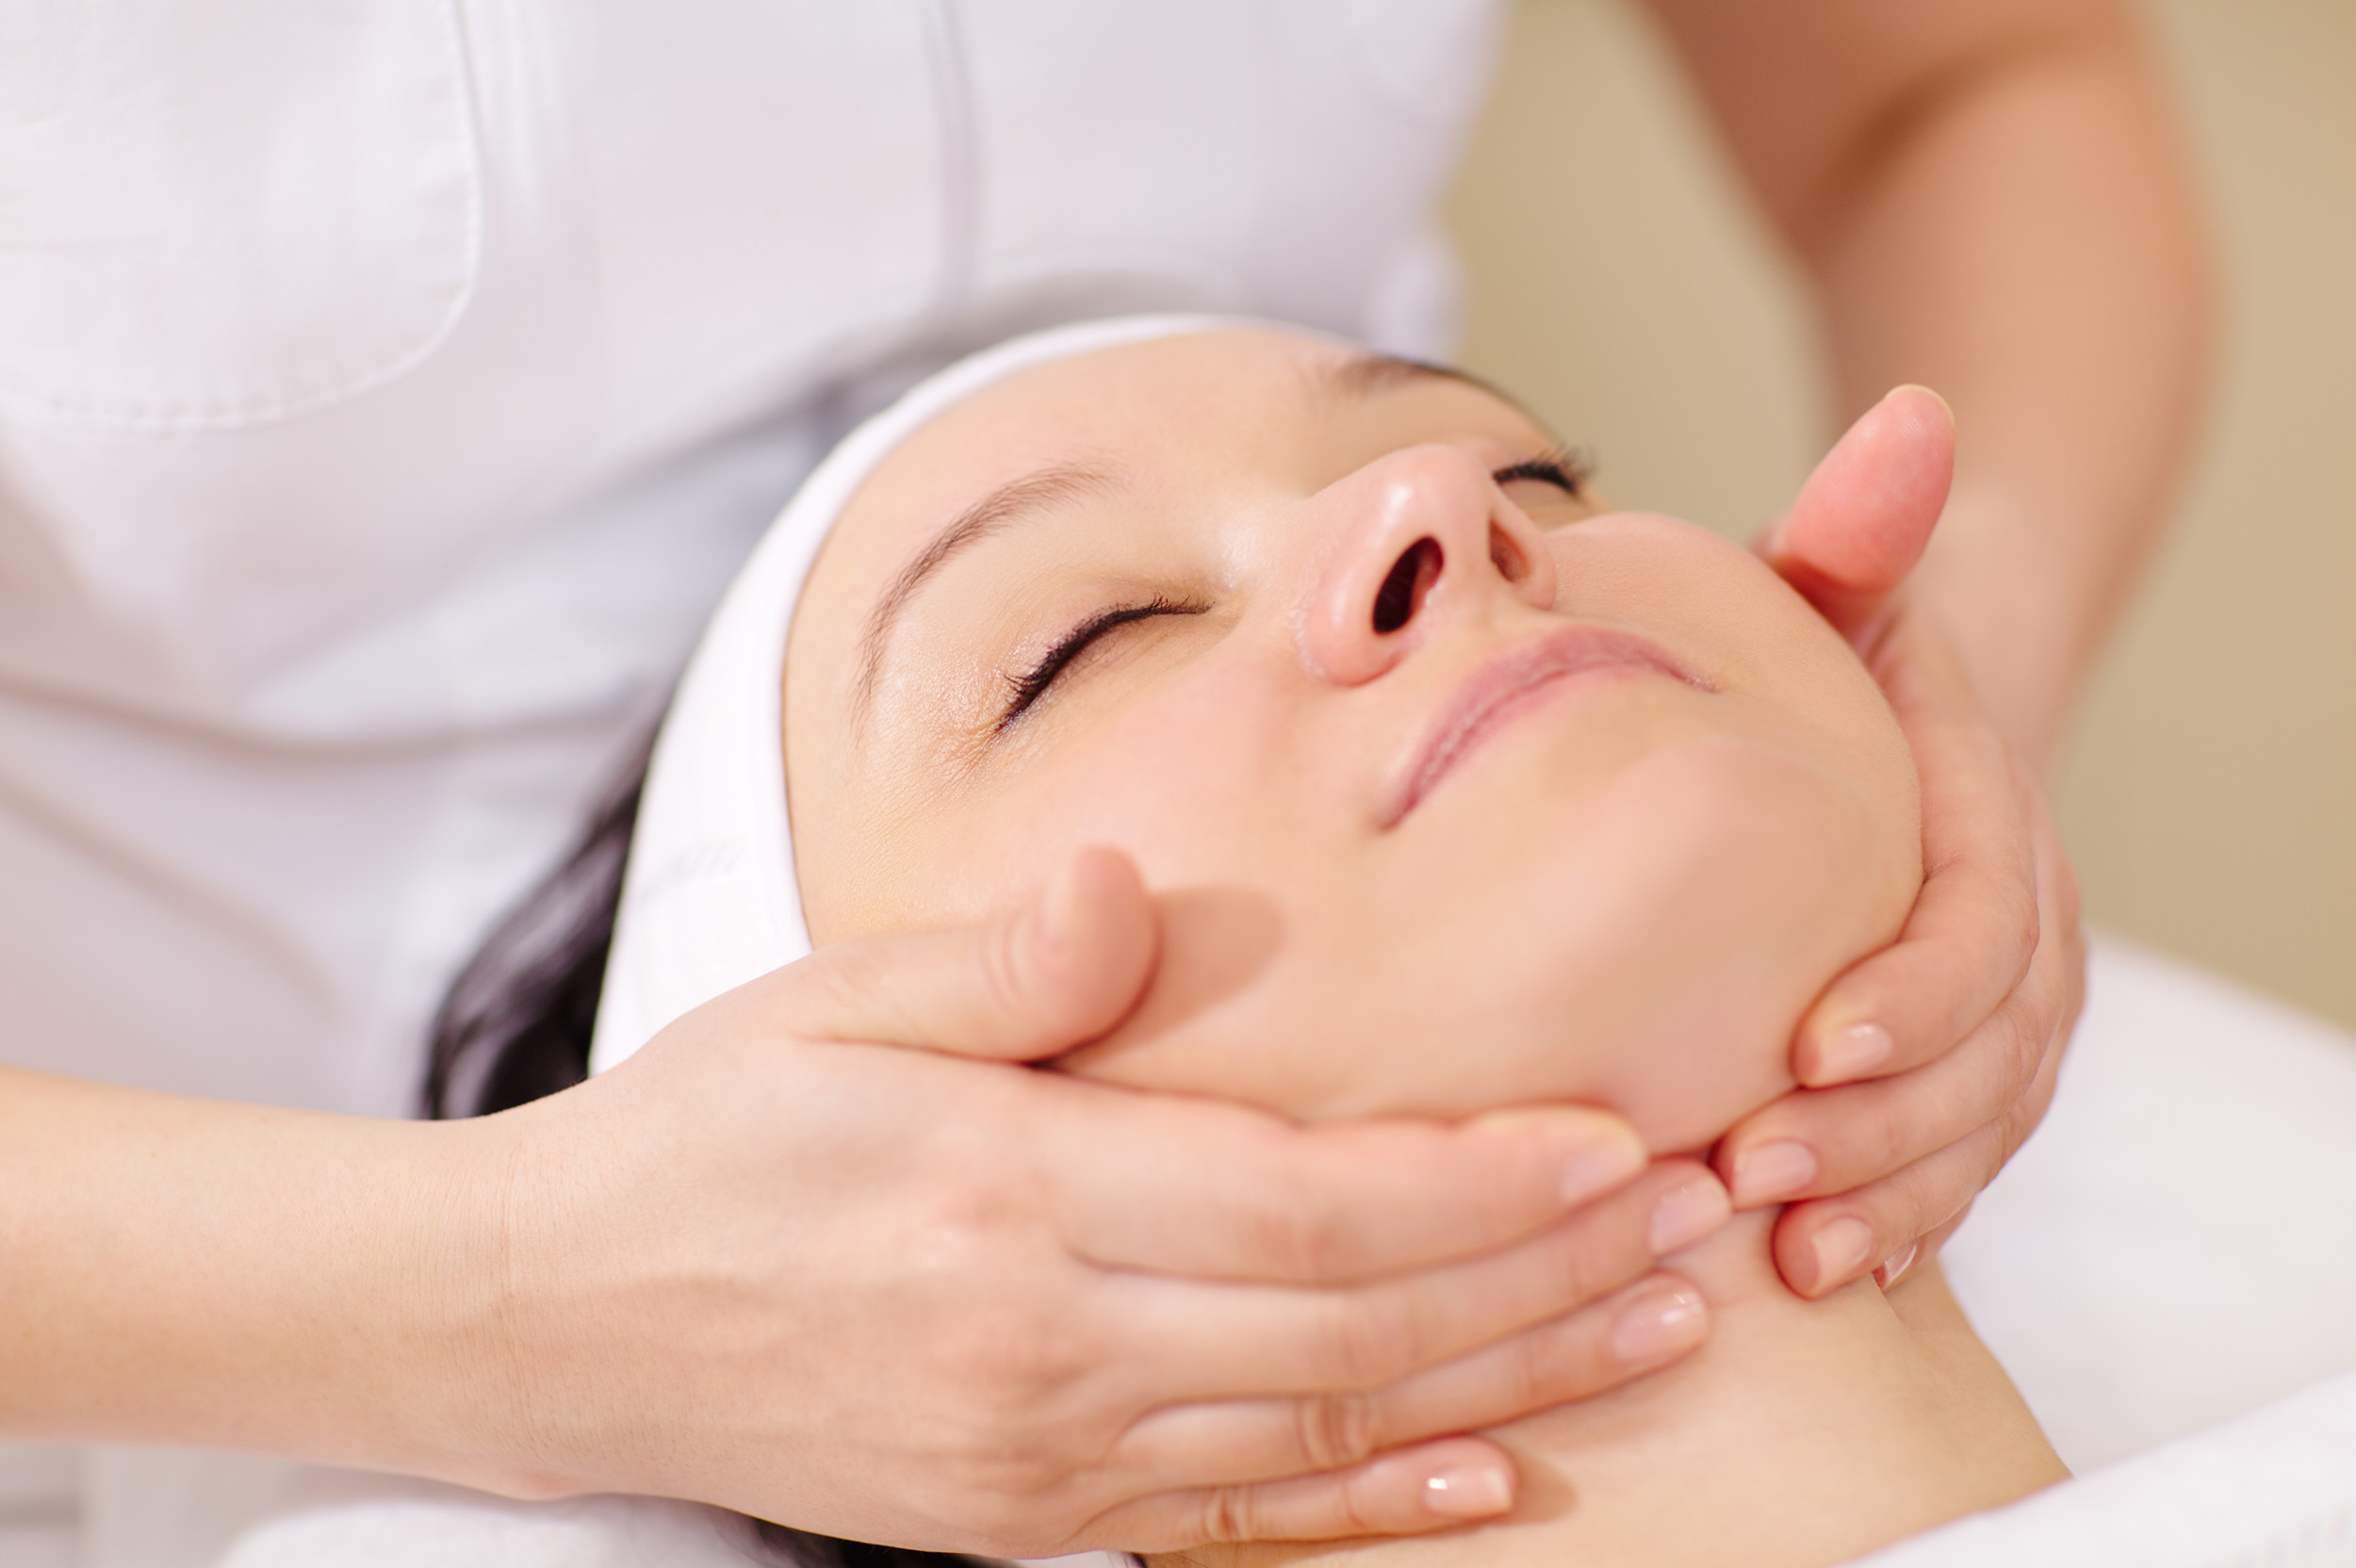 Defining Beauty Wellness & Med Spa in Tampa offers facials